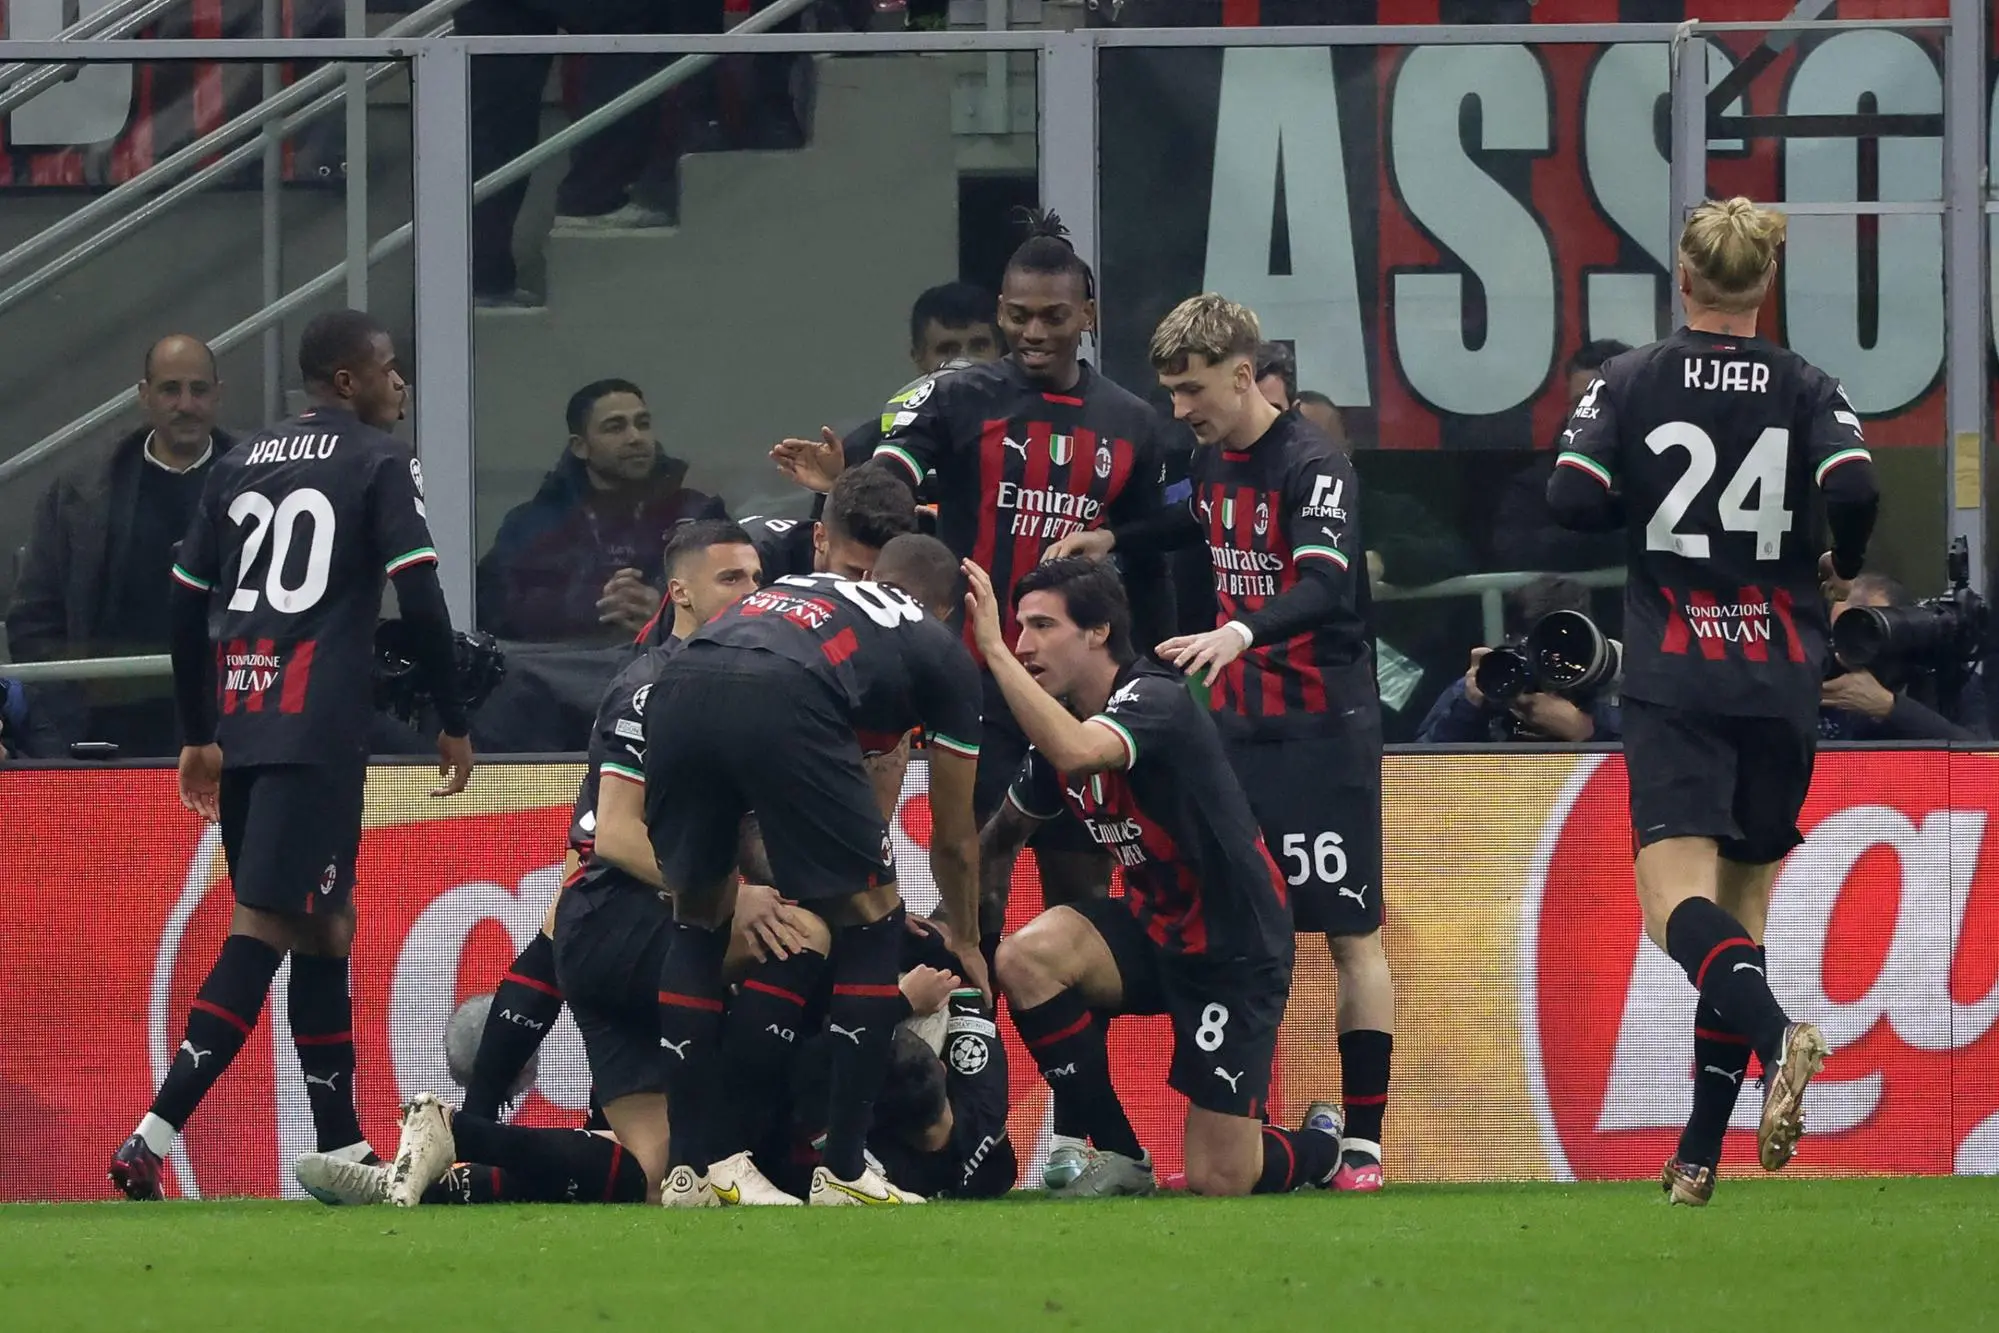 AC Milan players celebrate the goal scored by AC Milan's midfielder Brahim Diaz during the 1st leg of the UEFA Champions League round of 16 soccer match between AC Milan and Tottenham Hotspurs at Giuseppe Meazza Stadium in Milan, Italy, 14 Februray 2023. ANSA / ROBERTO BREGANI